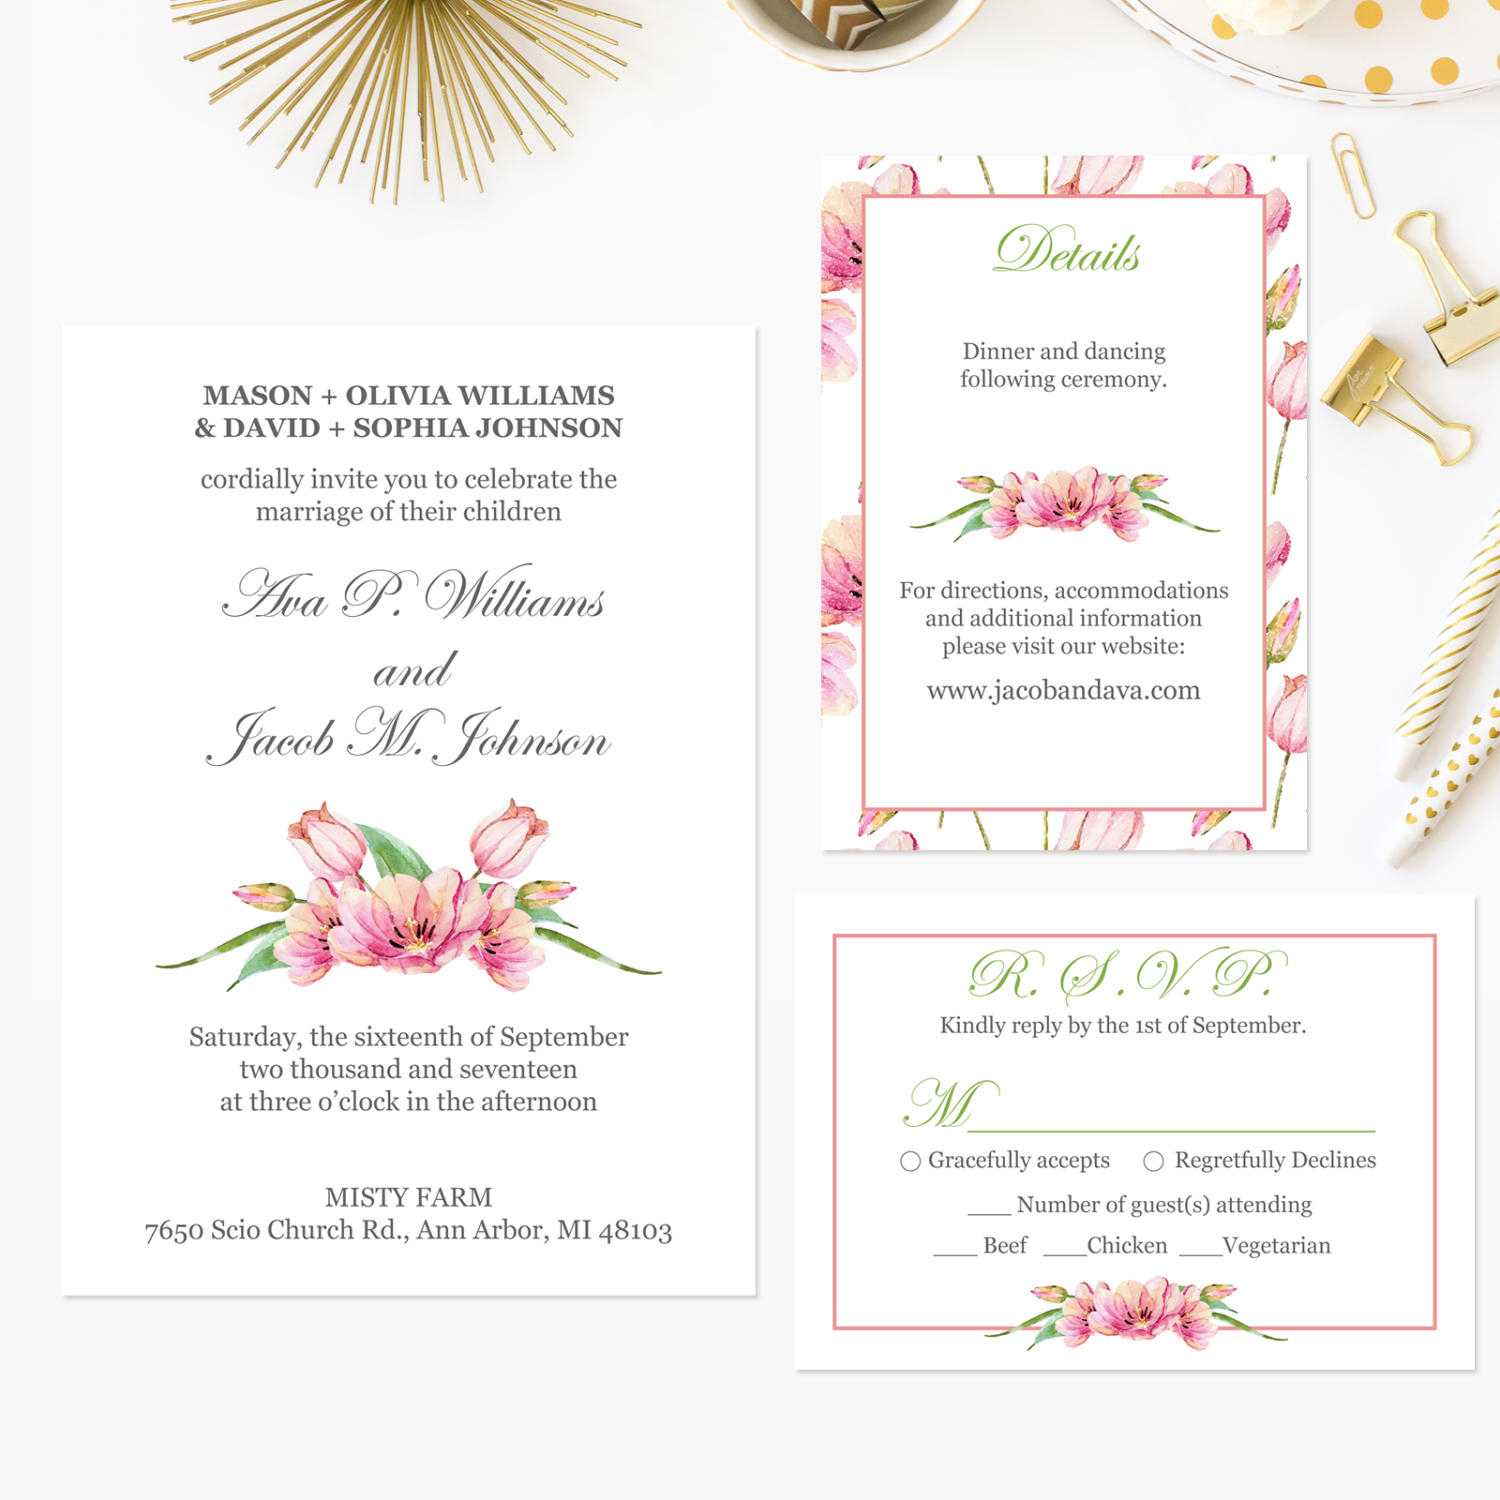 Diy Wedding Invitation Template, Printable Wedding Invitations With Rsvp  And Details Card, Instant Download Pdf Template #fpk 06S Inside Church Wedding Invitation Card Template